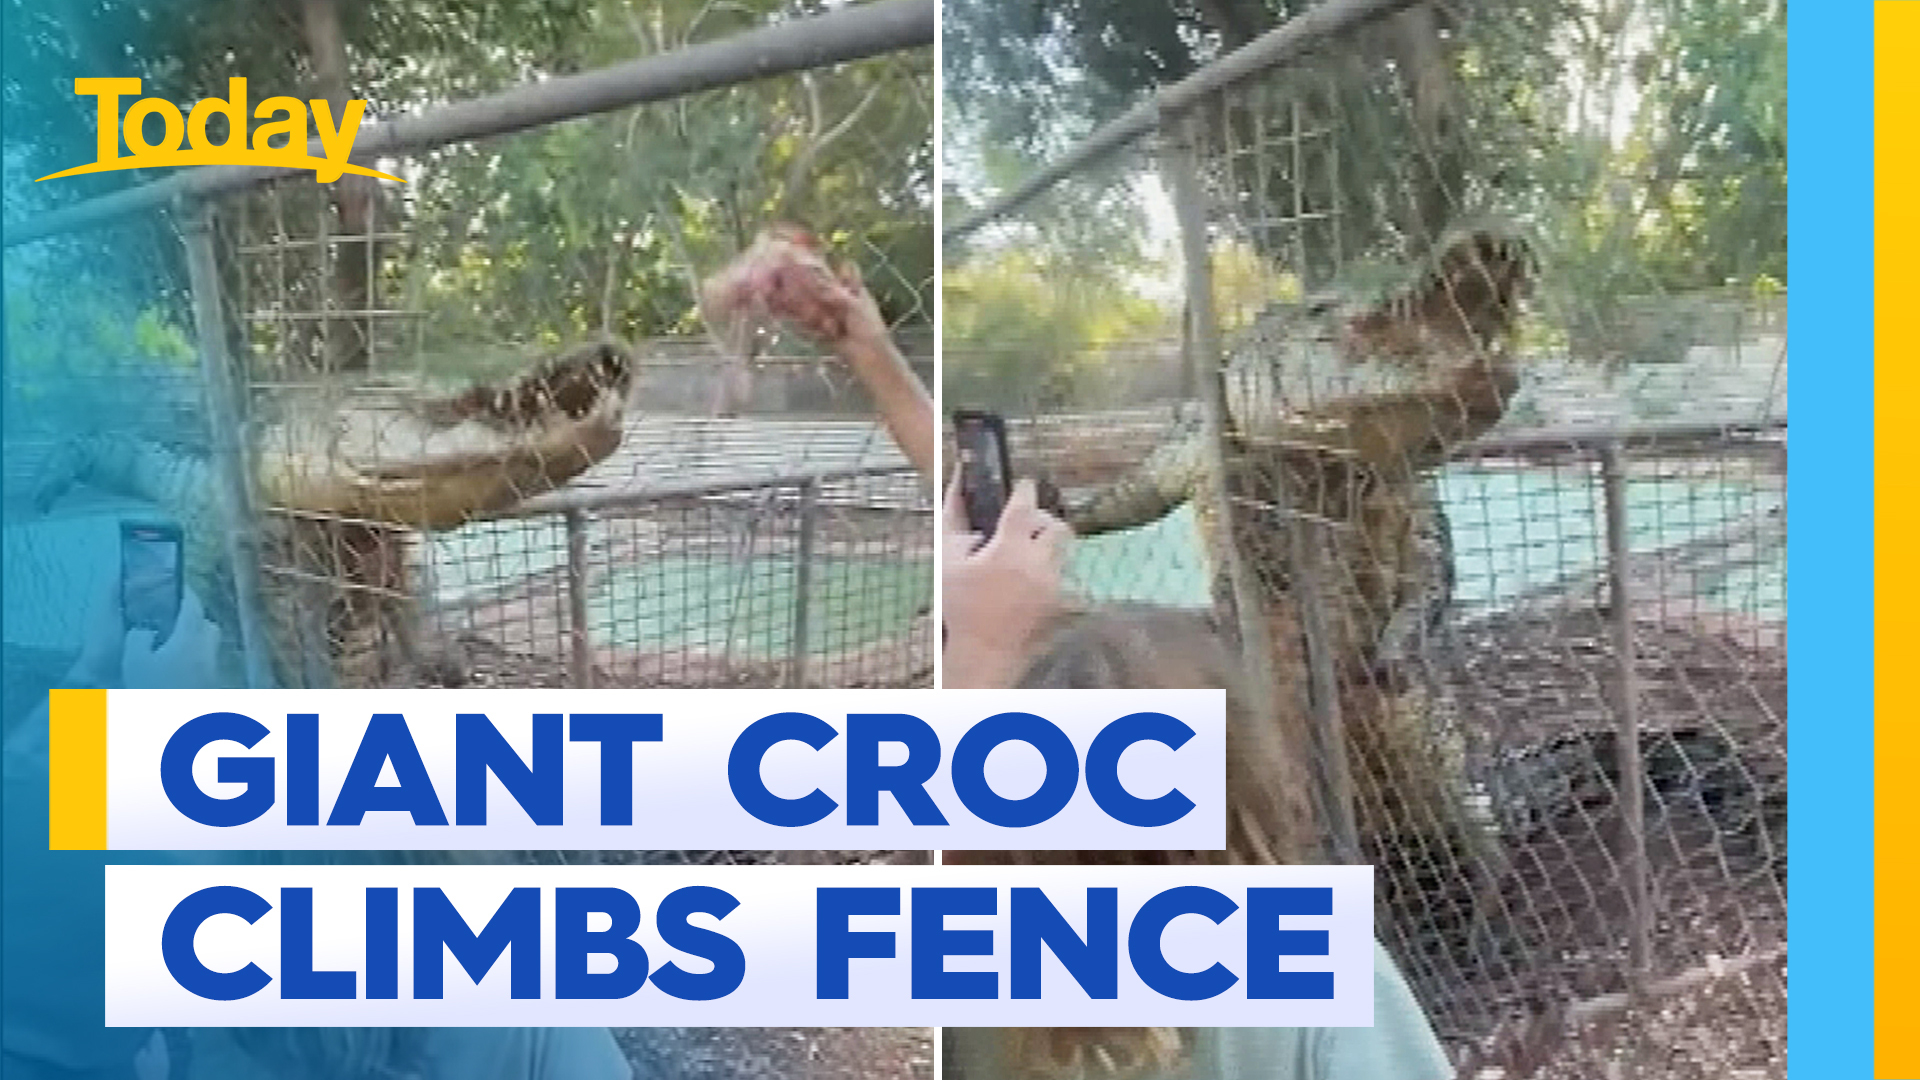 Audience told to run as crocodiles scale park fence